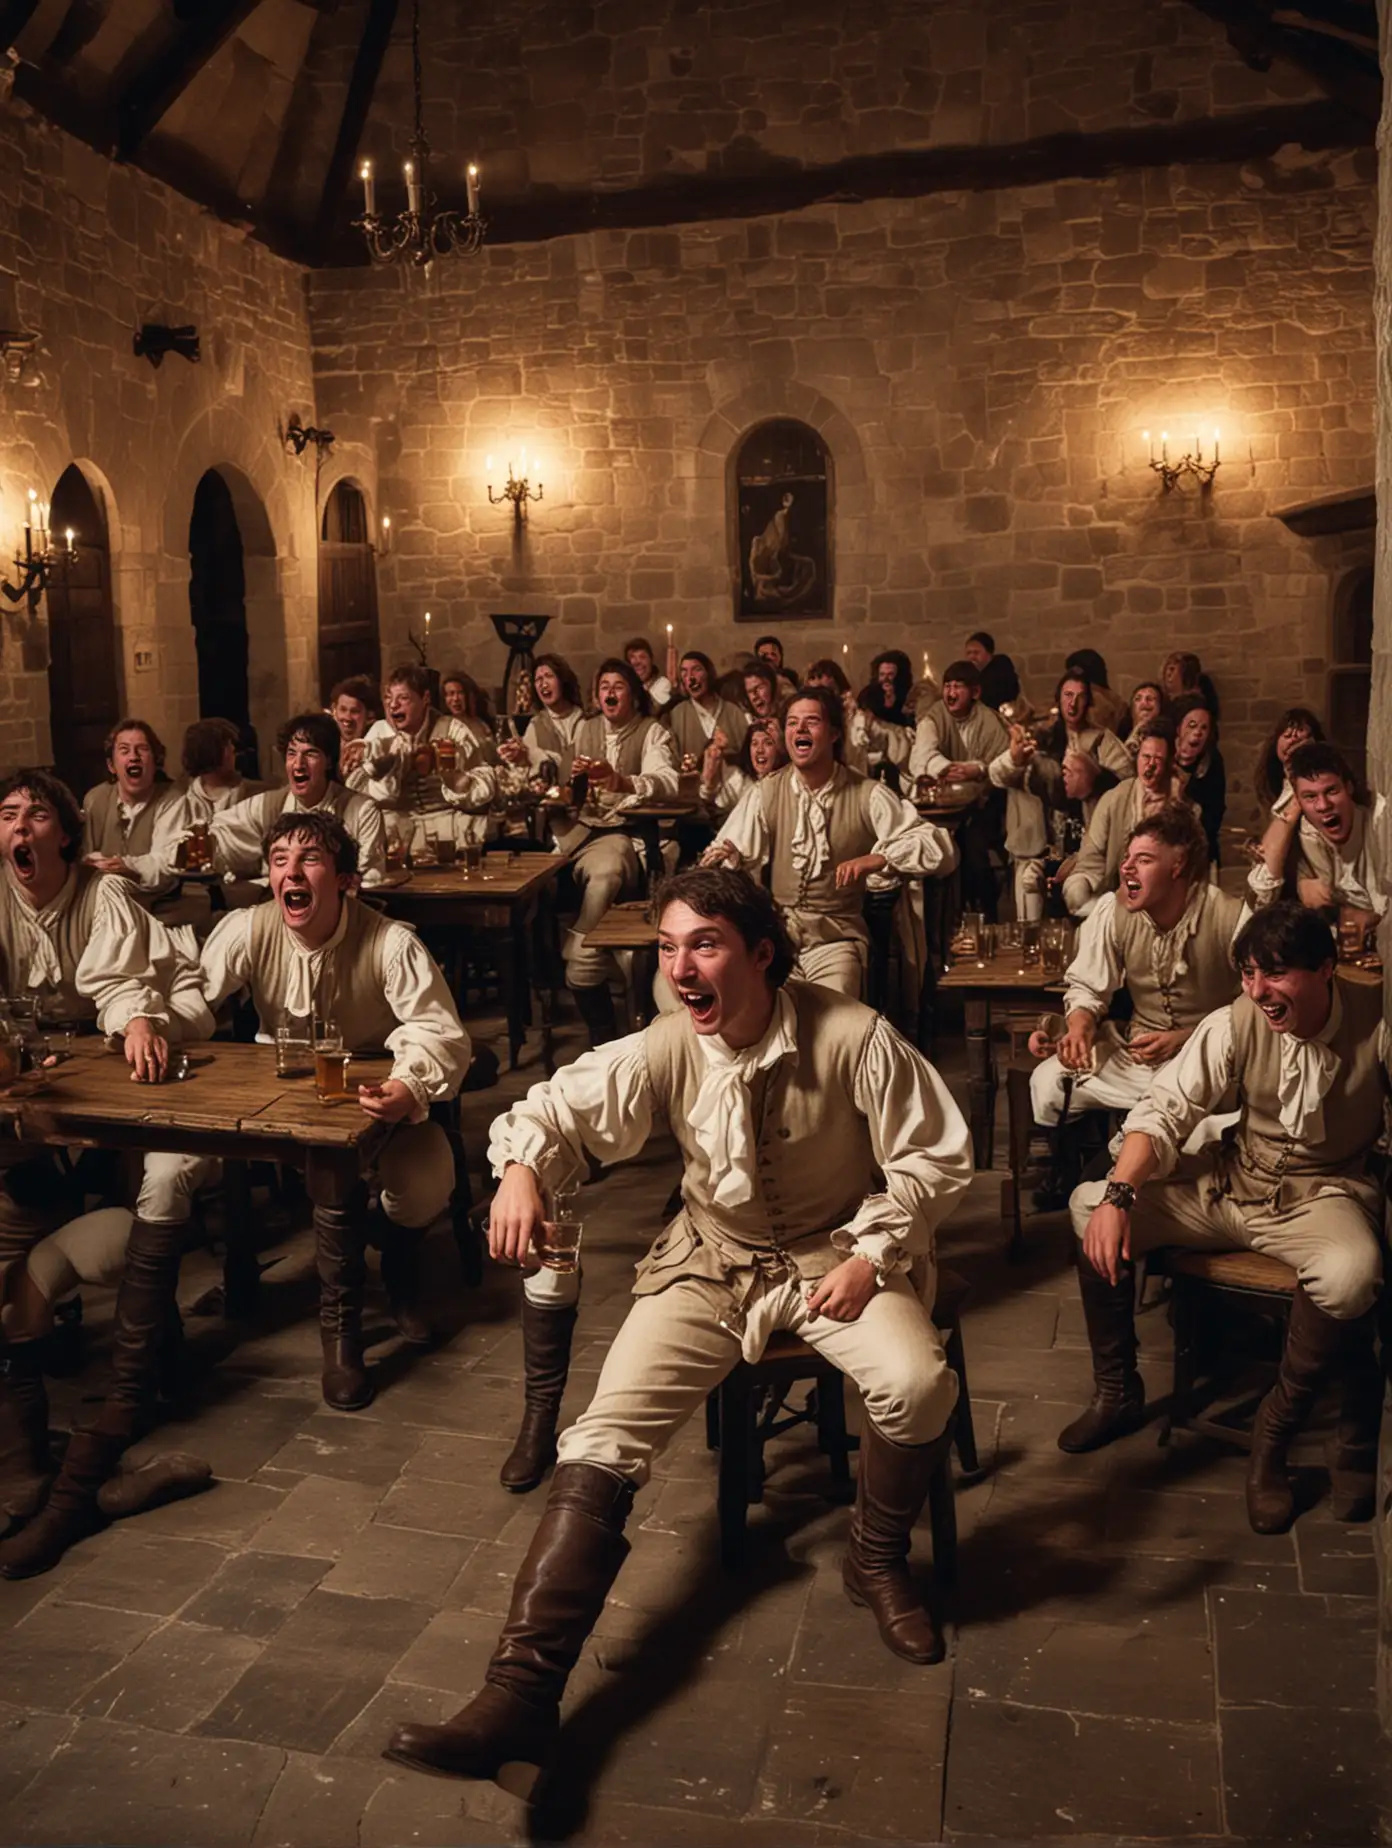 A  hall in a 17th century castle, full with young men sitting on a tables and drinking, dressed with light clothing, boots, shouting, joyful and happy atmosphere, at night, shot from the floor